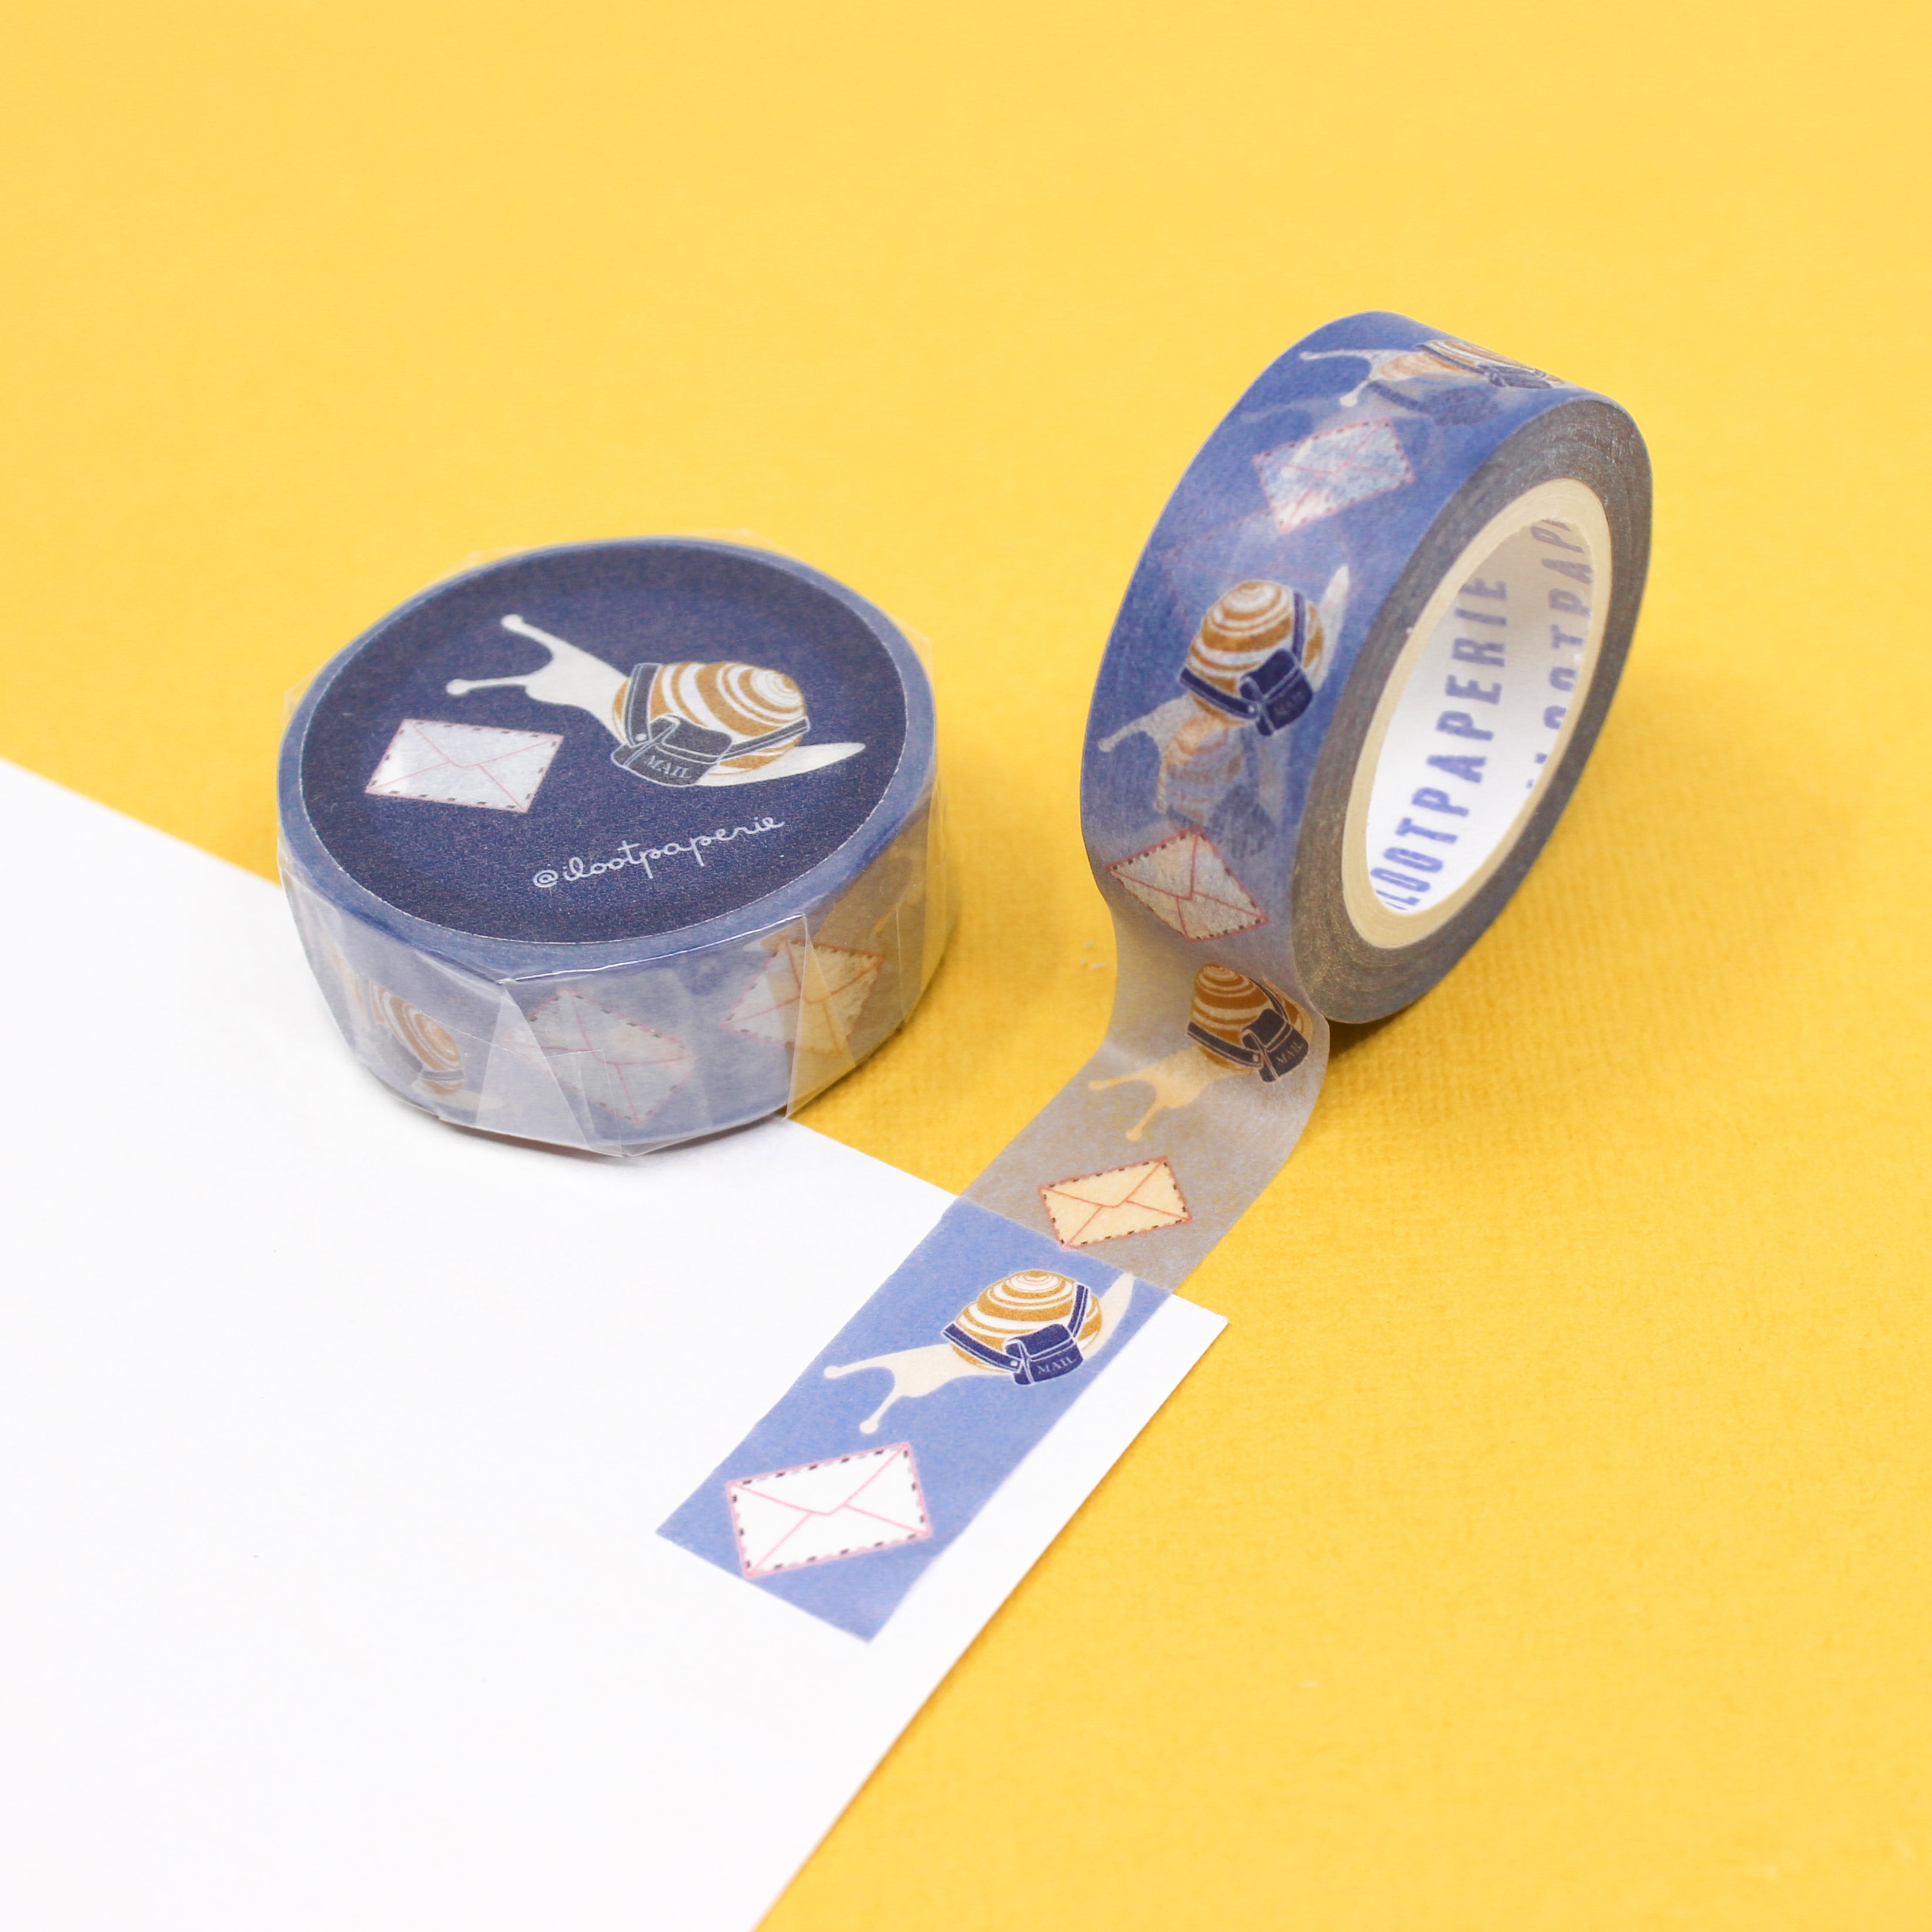 This is little snail mail delivery envelope collection washi tape from BBB Supplies Craft Shop